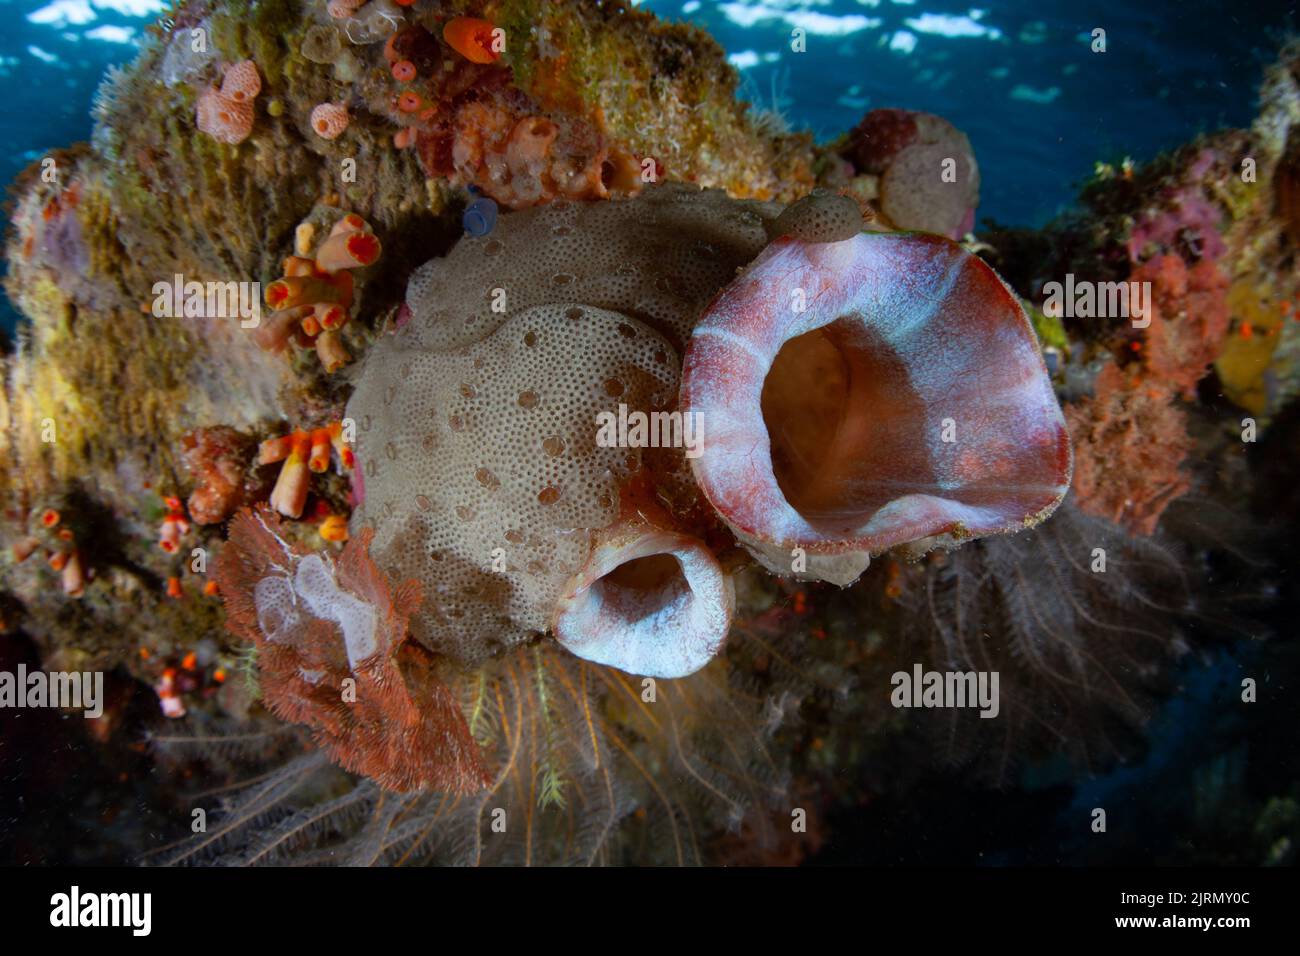 A large solitary tunicate grows on a coral reef in Raja Ampat, Indonesia. Tunicates feed on organic material in the water thus improving water quality. Stock Photo